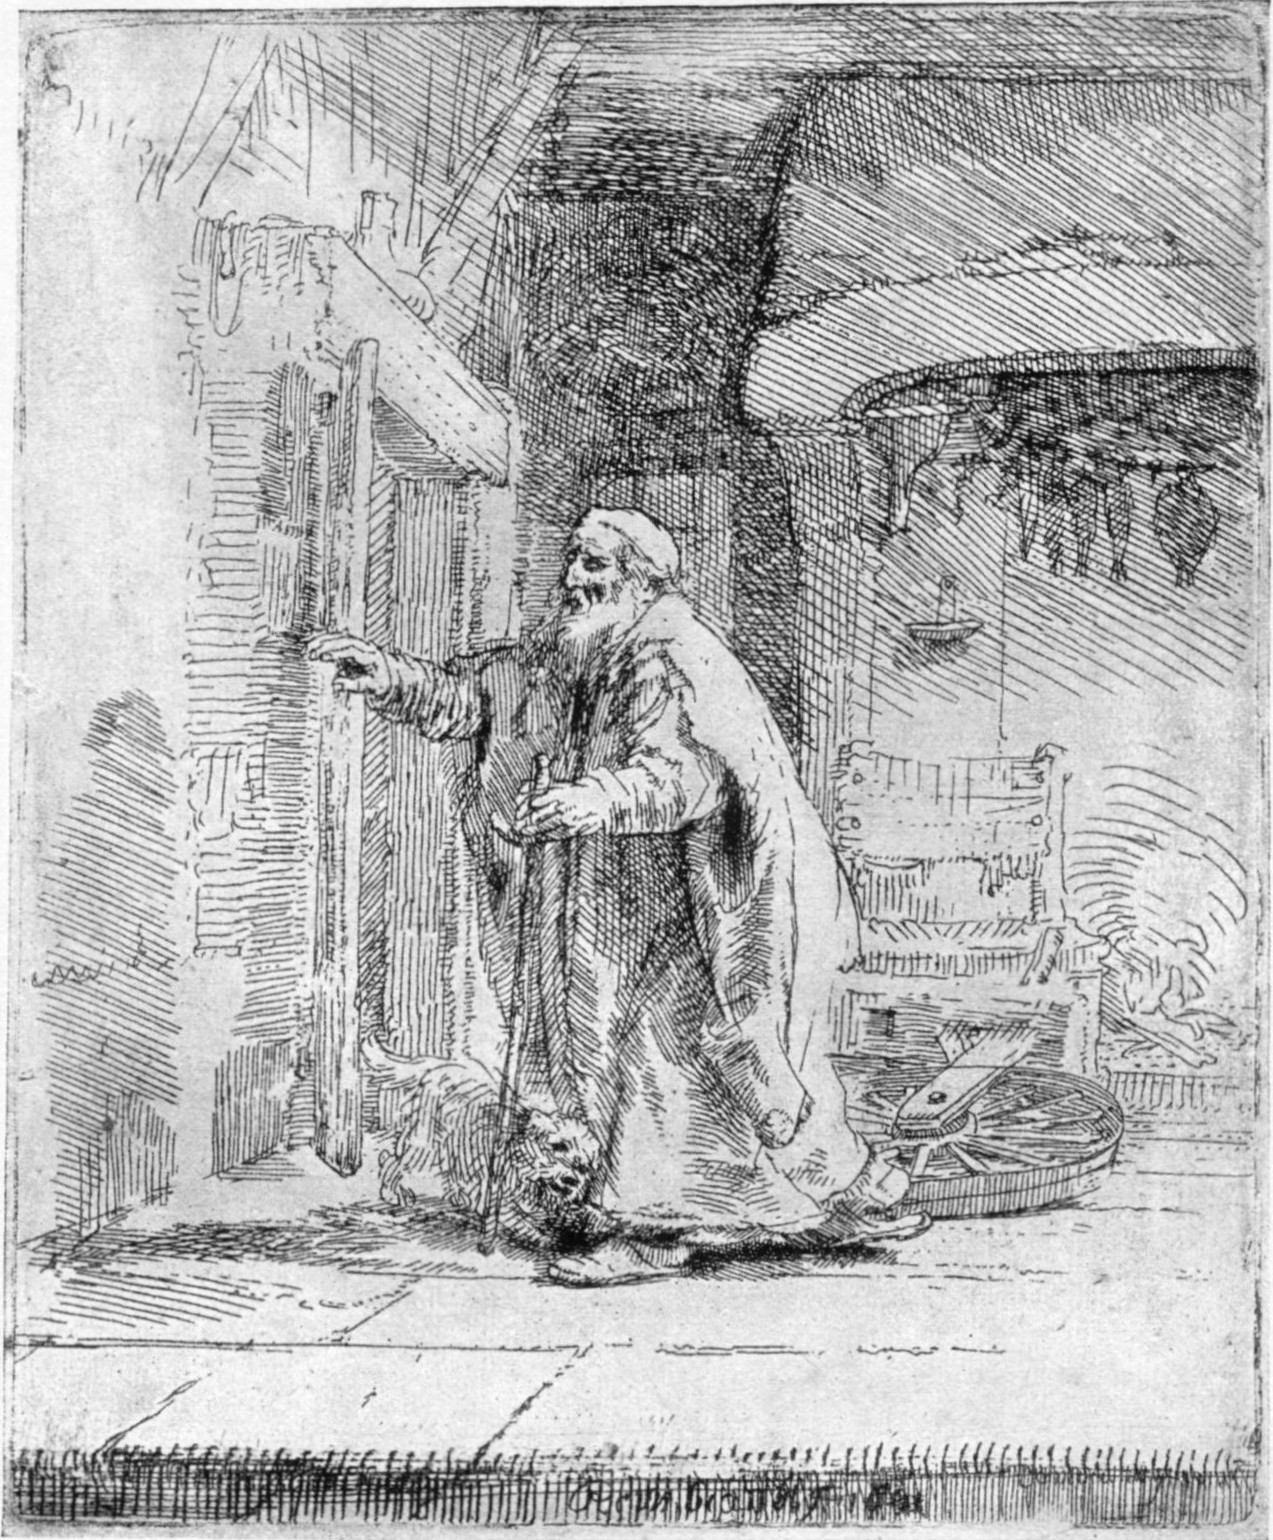 252. THE BLINDNESS OF TOBIT: THE LARGER PLATE. 1651. B. 42